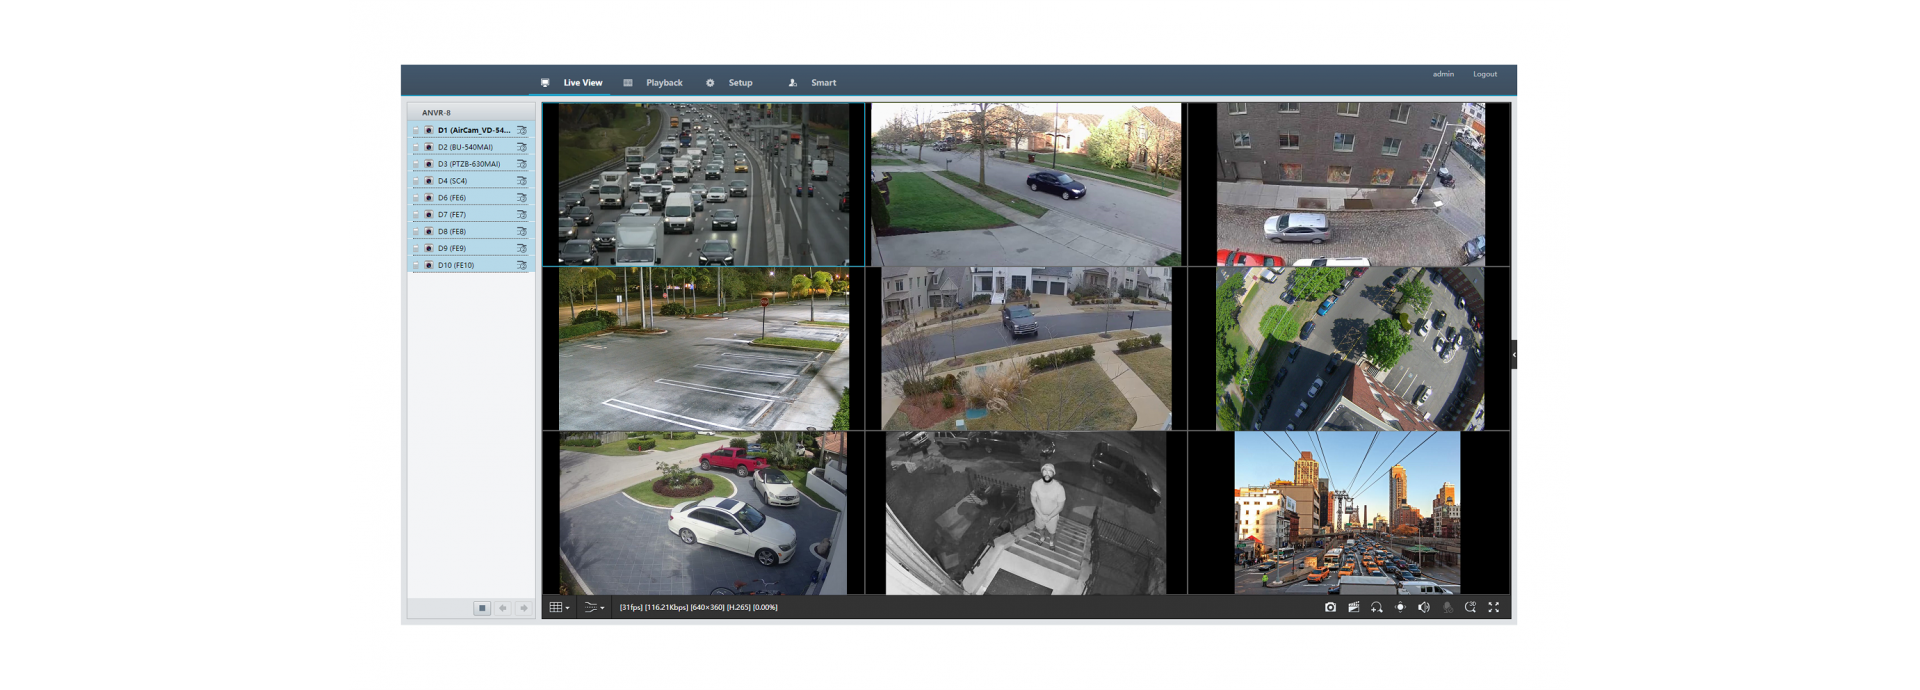 8 Channels IP camera Performing Real-time Remote Monitoring